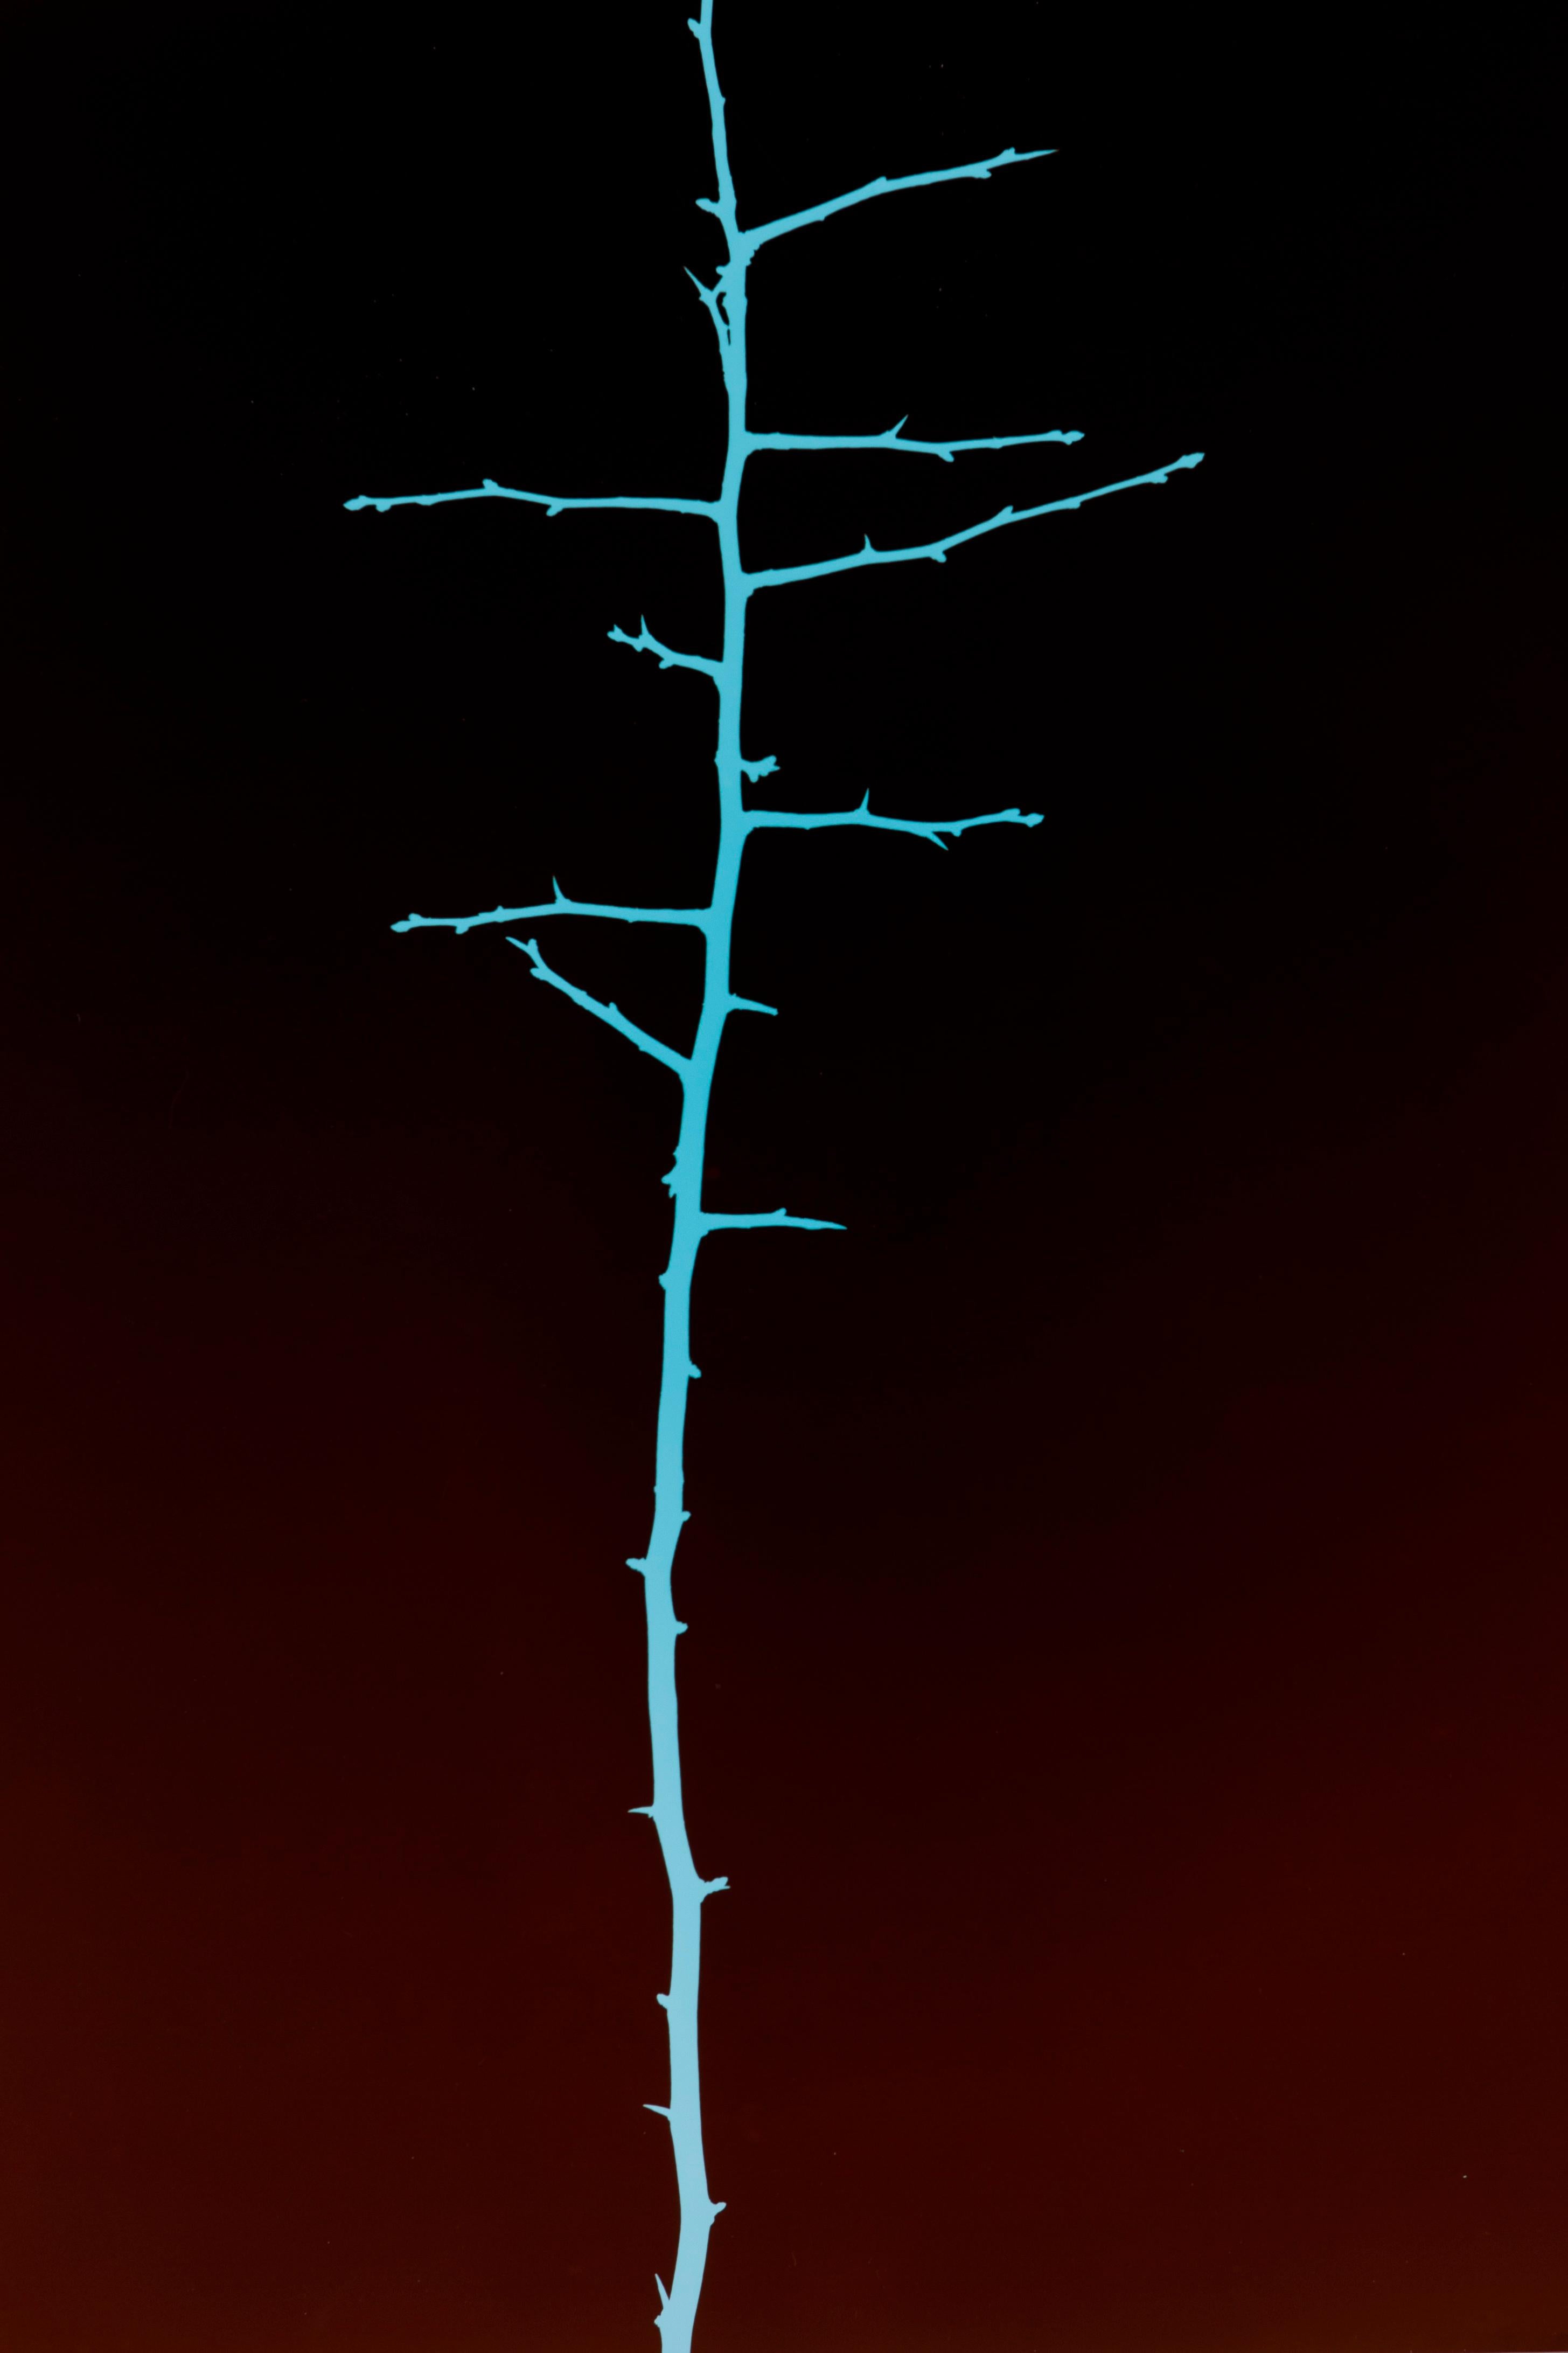 Regina Hügli Abstract Photograph - Trees (Nr. 9/2) - Black and Turquoise Blackthorn Branch Photogram